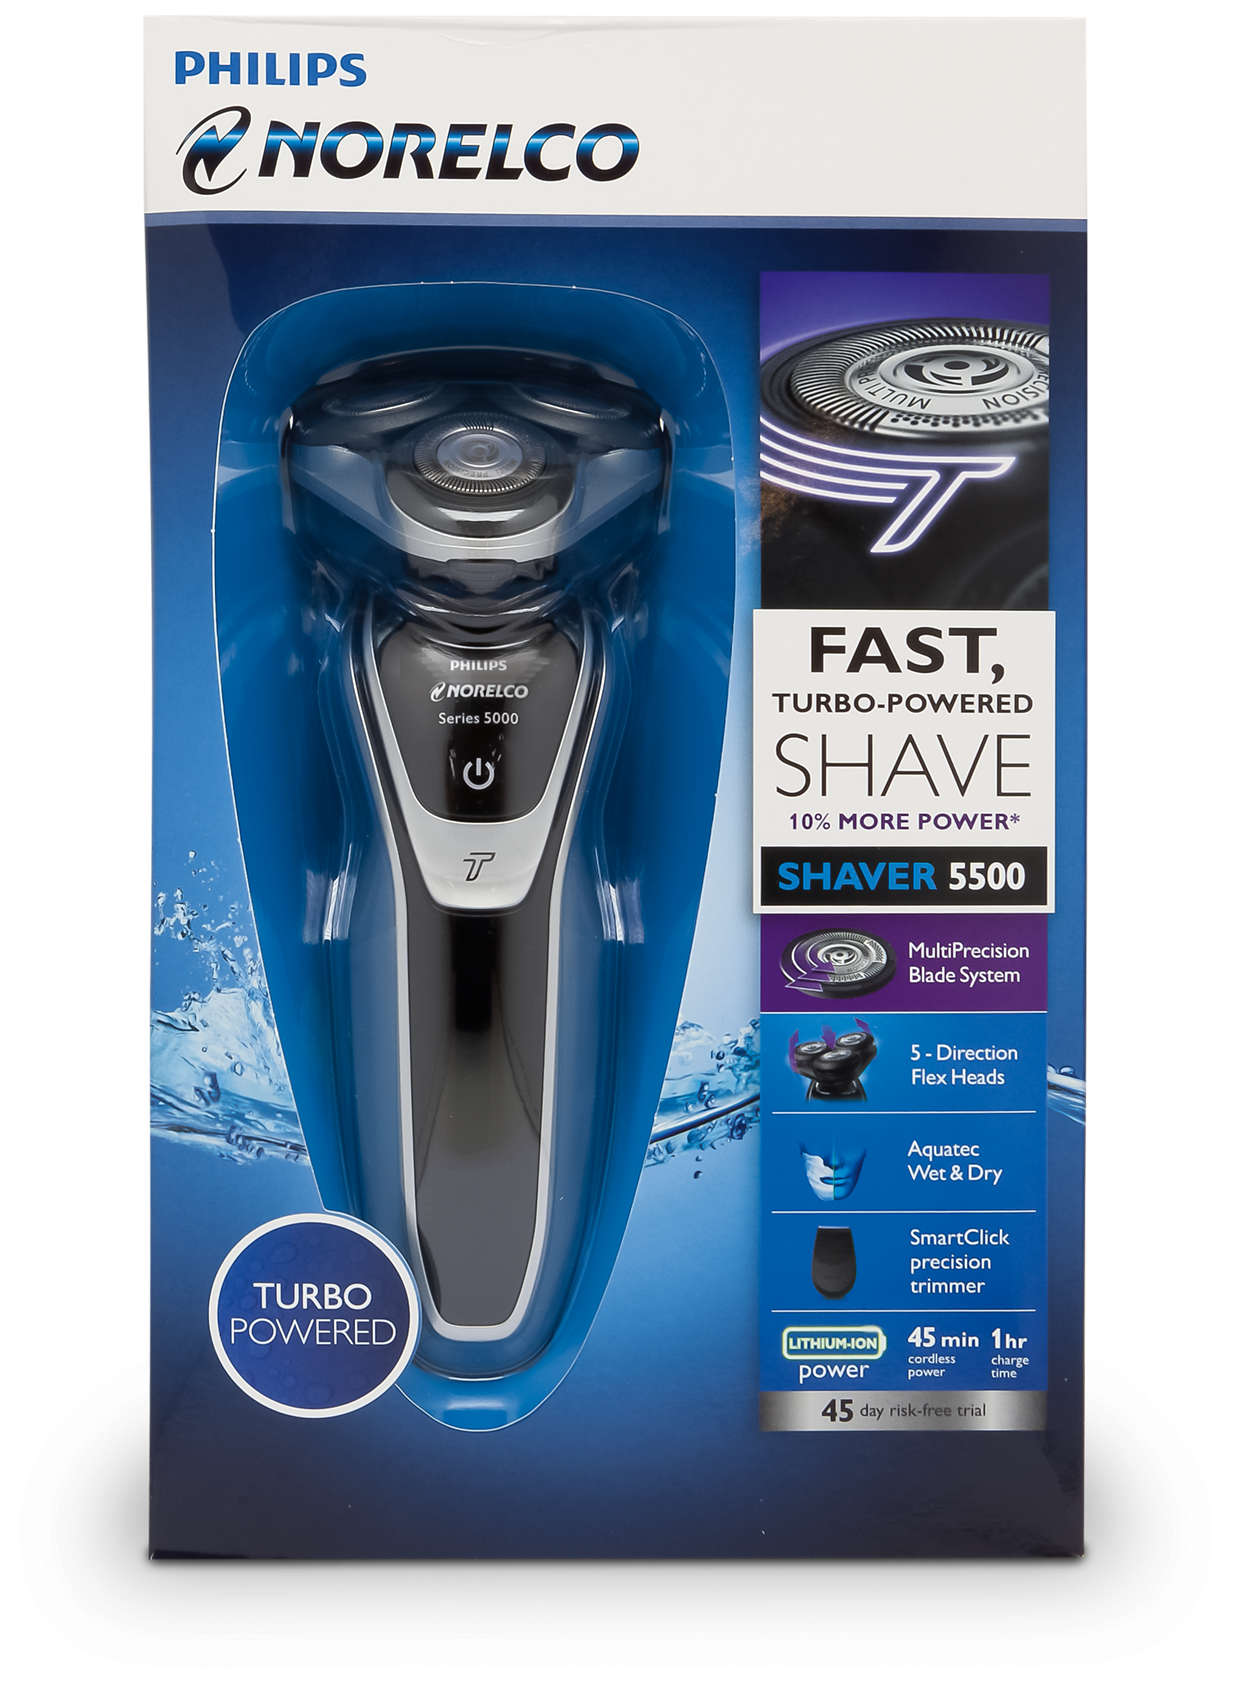 Philips Norelco 5000 Series. Philips Shaver Series 5000. Филипс 5500. ✅Philips s1111/81 Shaver 2100w. Philips fast